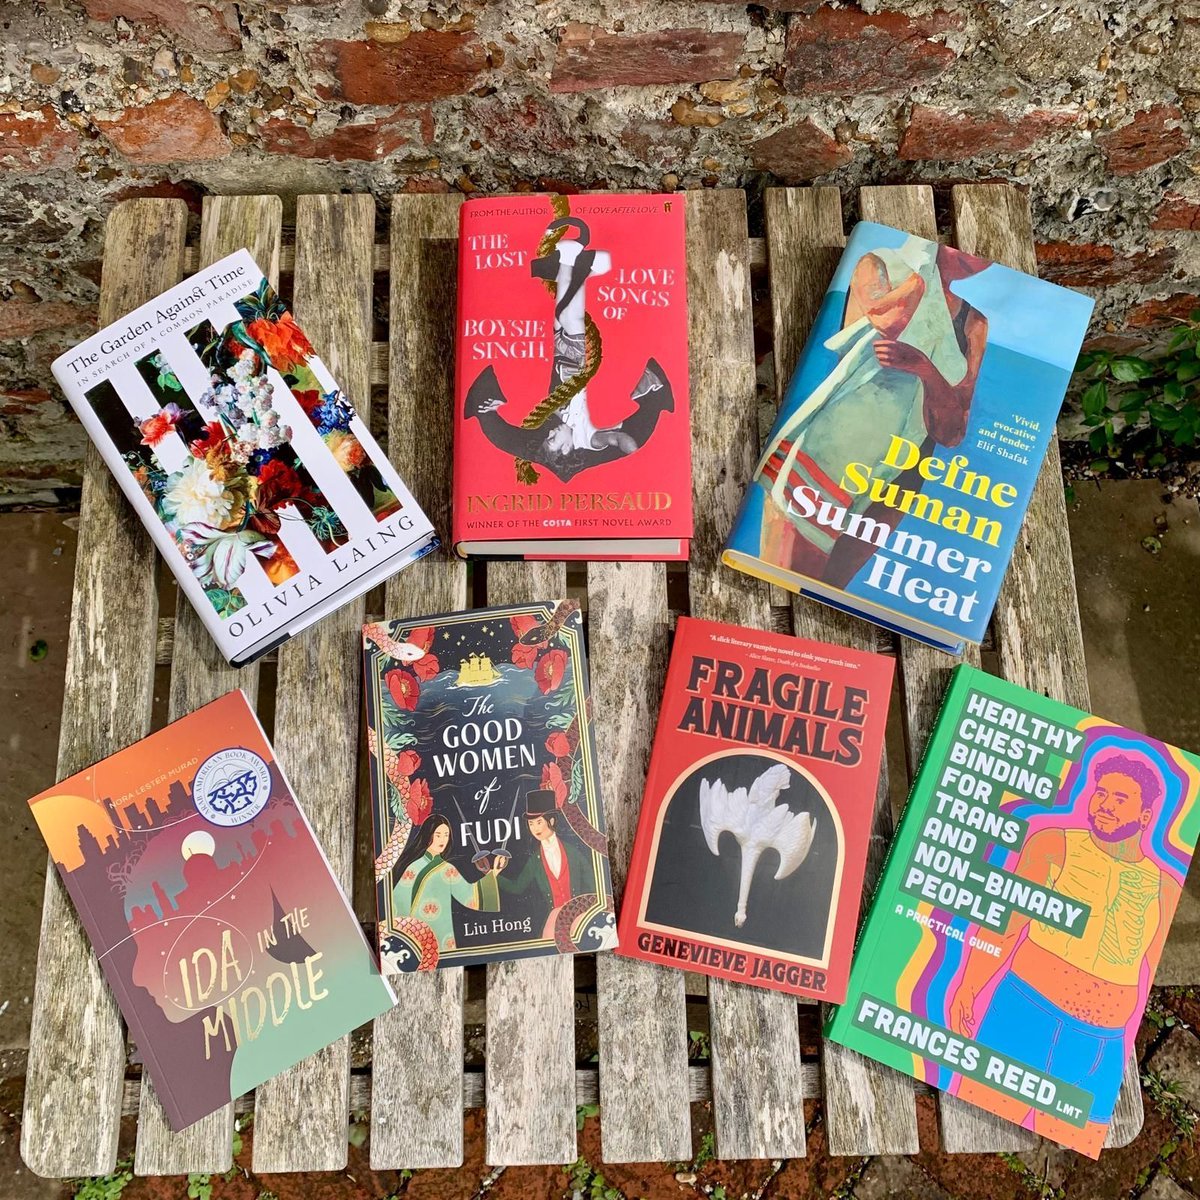 We've received a bunch of exciting new titles 🥰 We have new work from Olivia Laing, exciting historical fiction, gothic horror, young adult and more... 👀 Make sure to pop in this weekend for a browse!